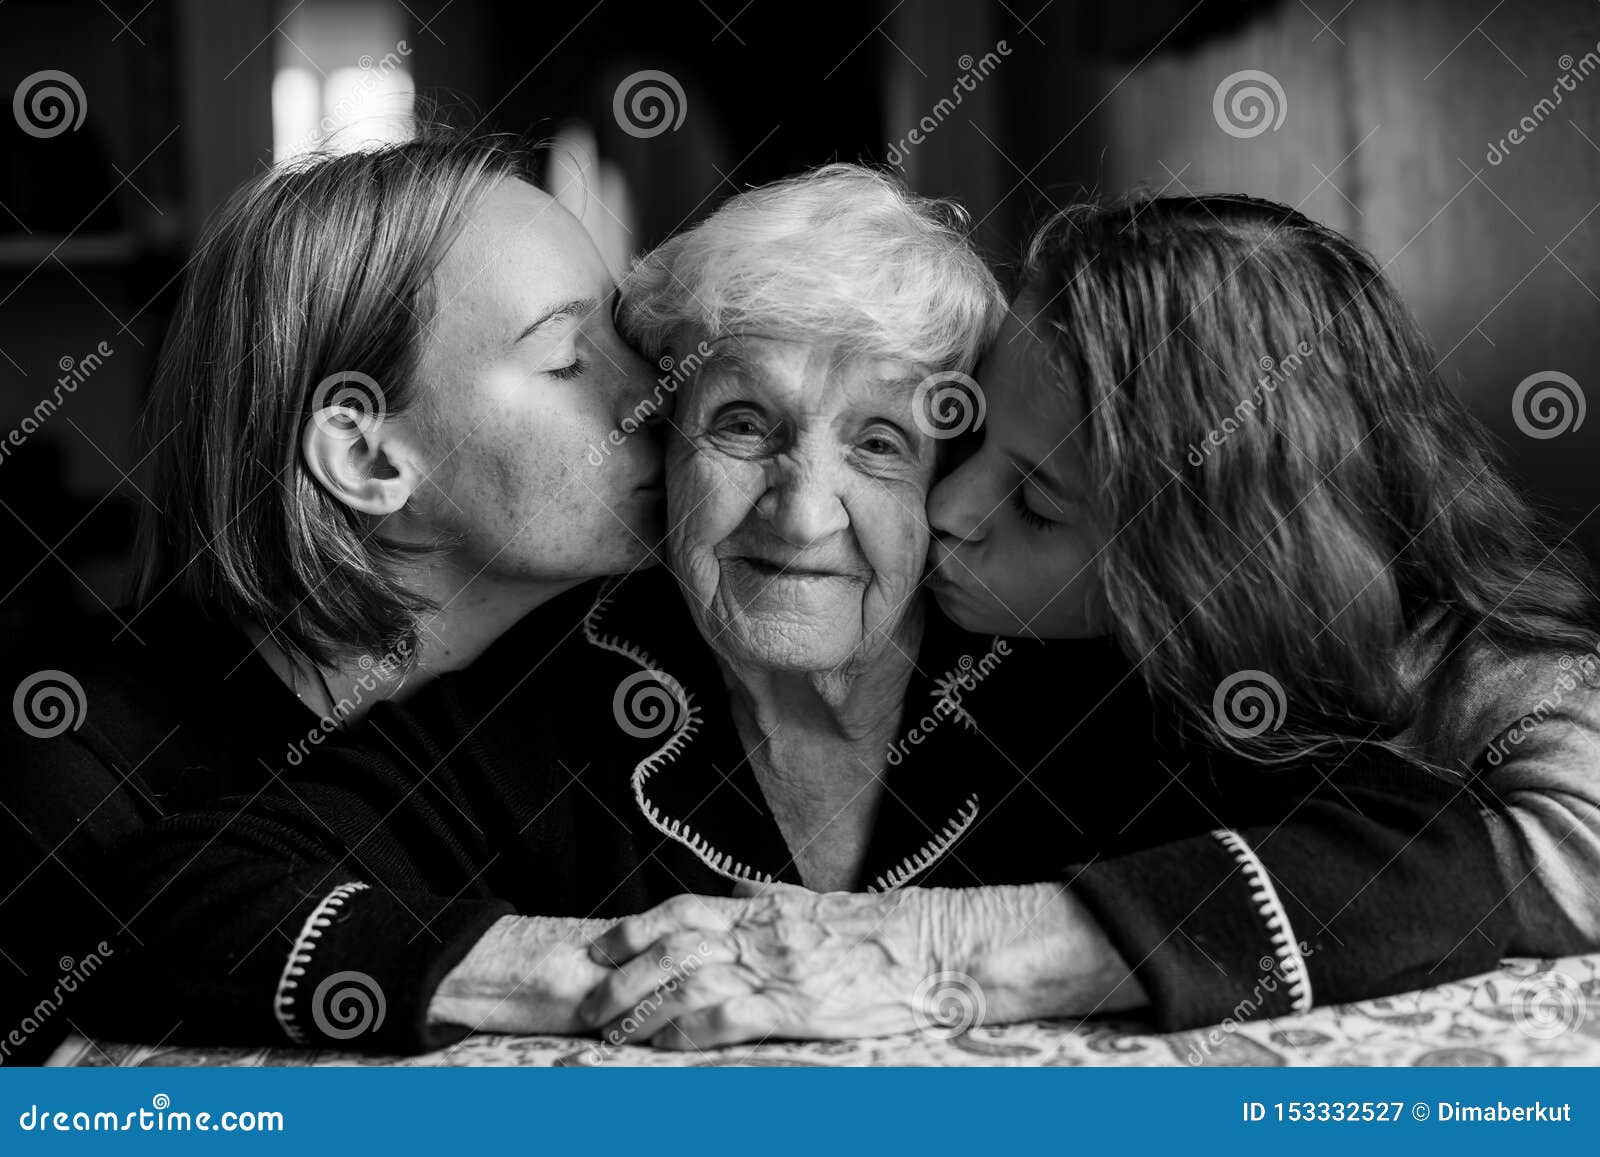 Granny And Young Girl Lesbians